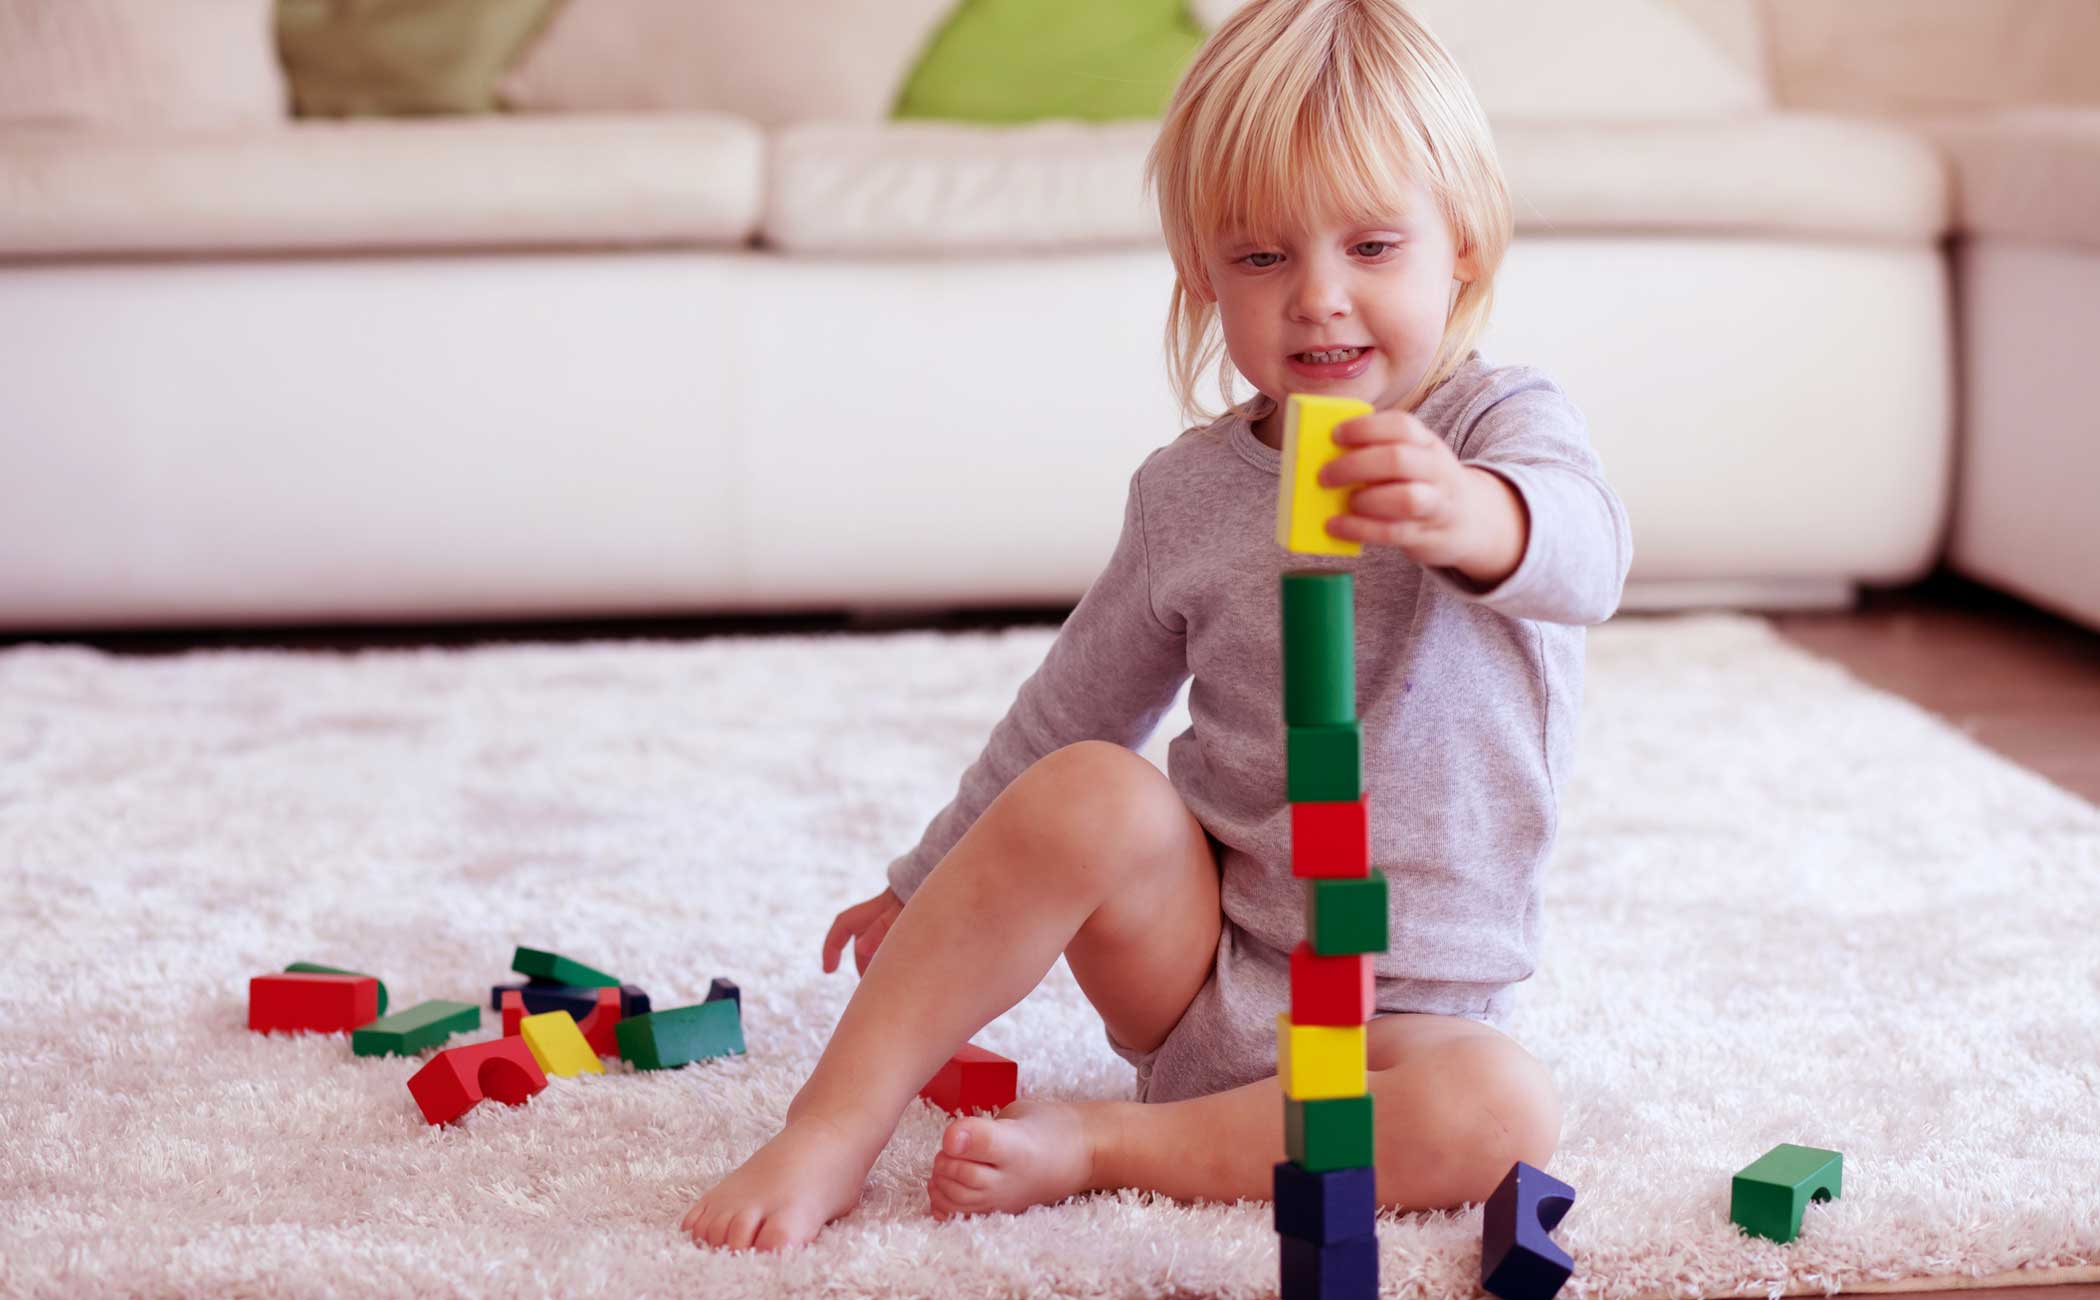 A young child with blonde hair, sitting on a light colored carpet, stacking colorful blocks. 